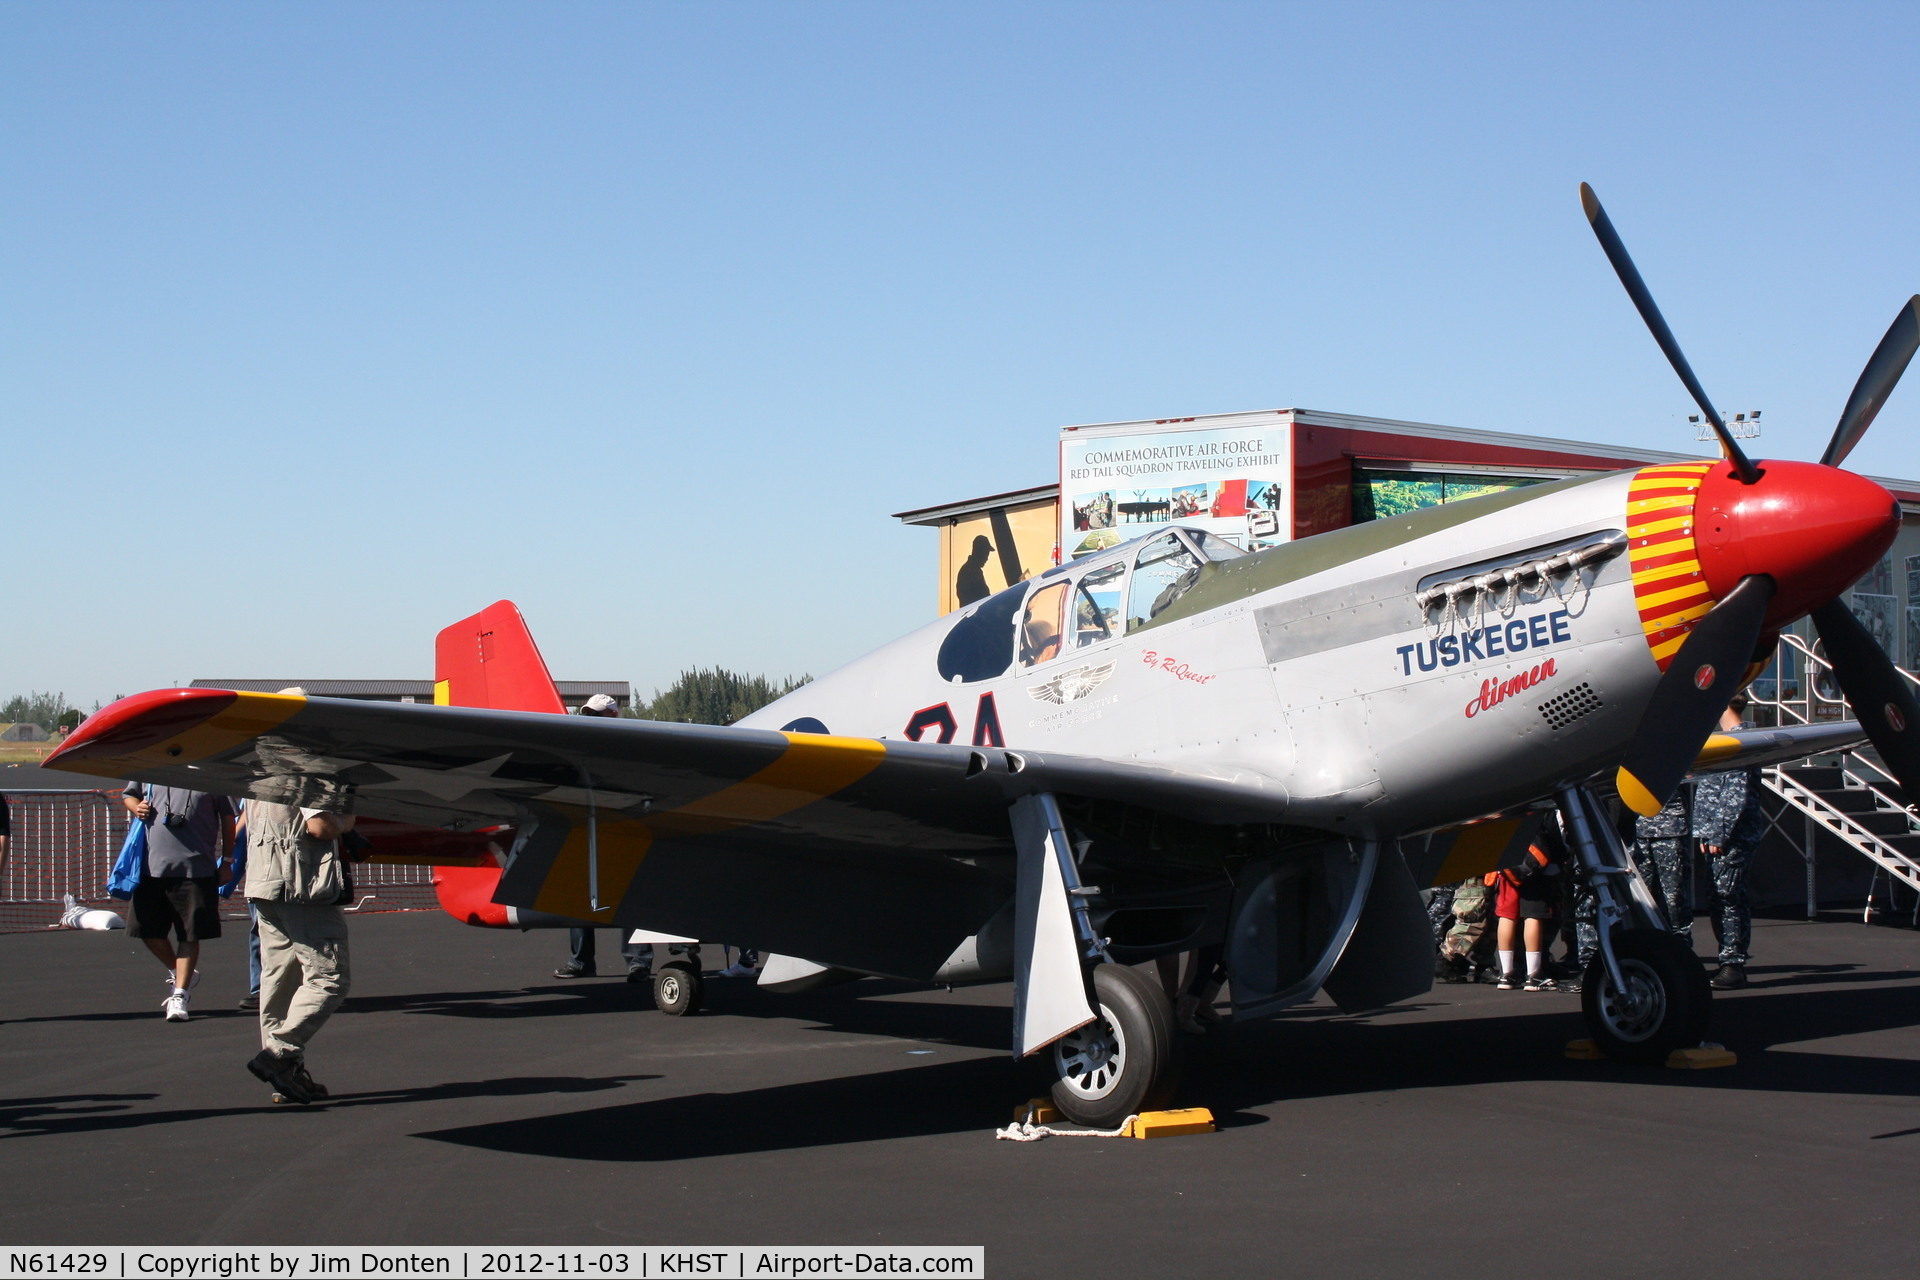 N61429, 1942 North American P-51C Mustang C/N 103-26199, P-51 Mustang (NX61429) of the Red Tails Squadron on static display at Wings over Homestead